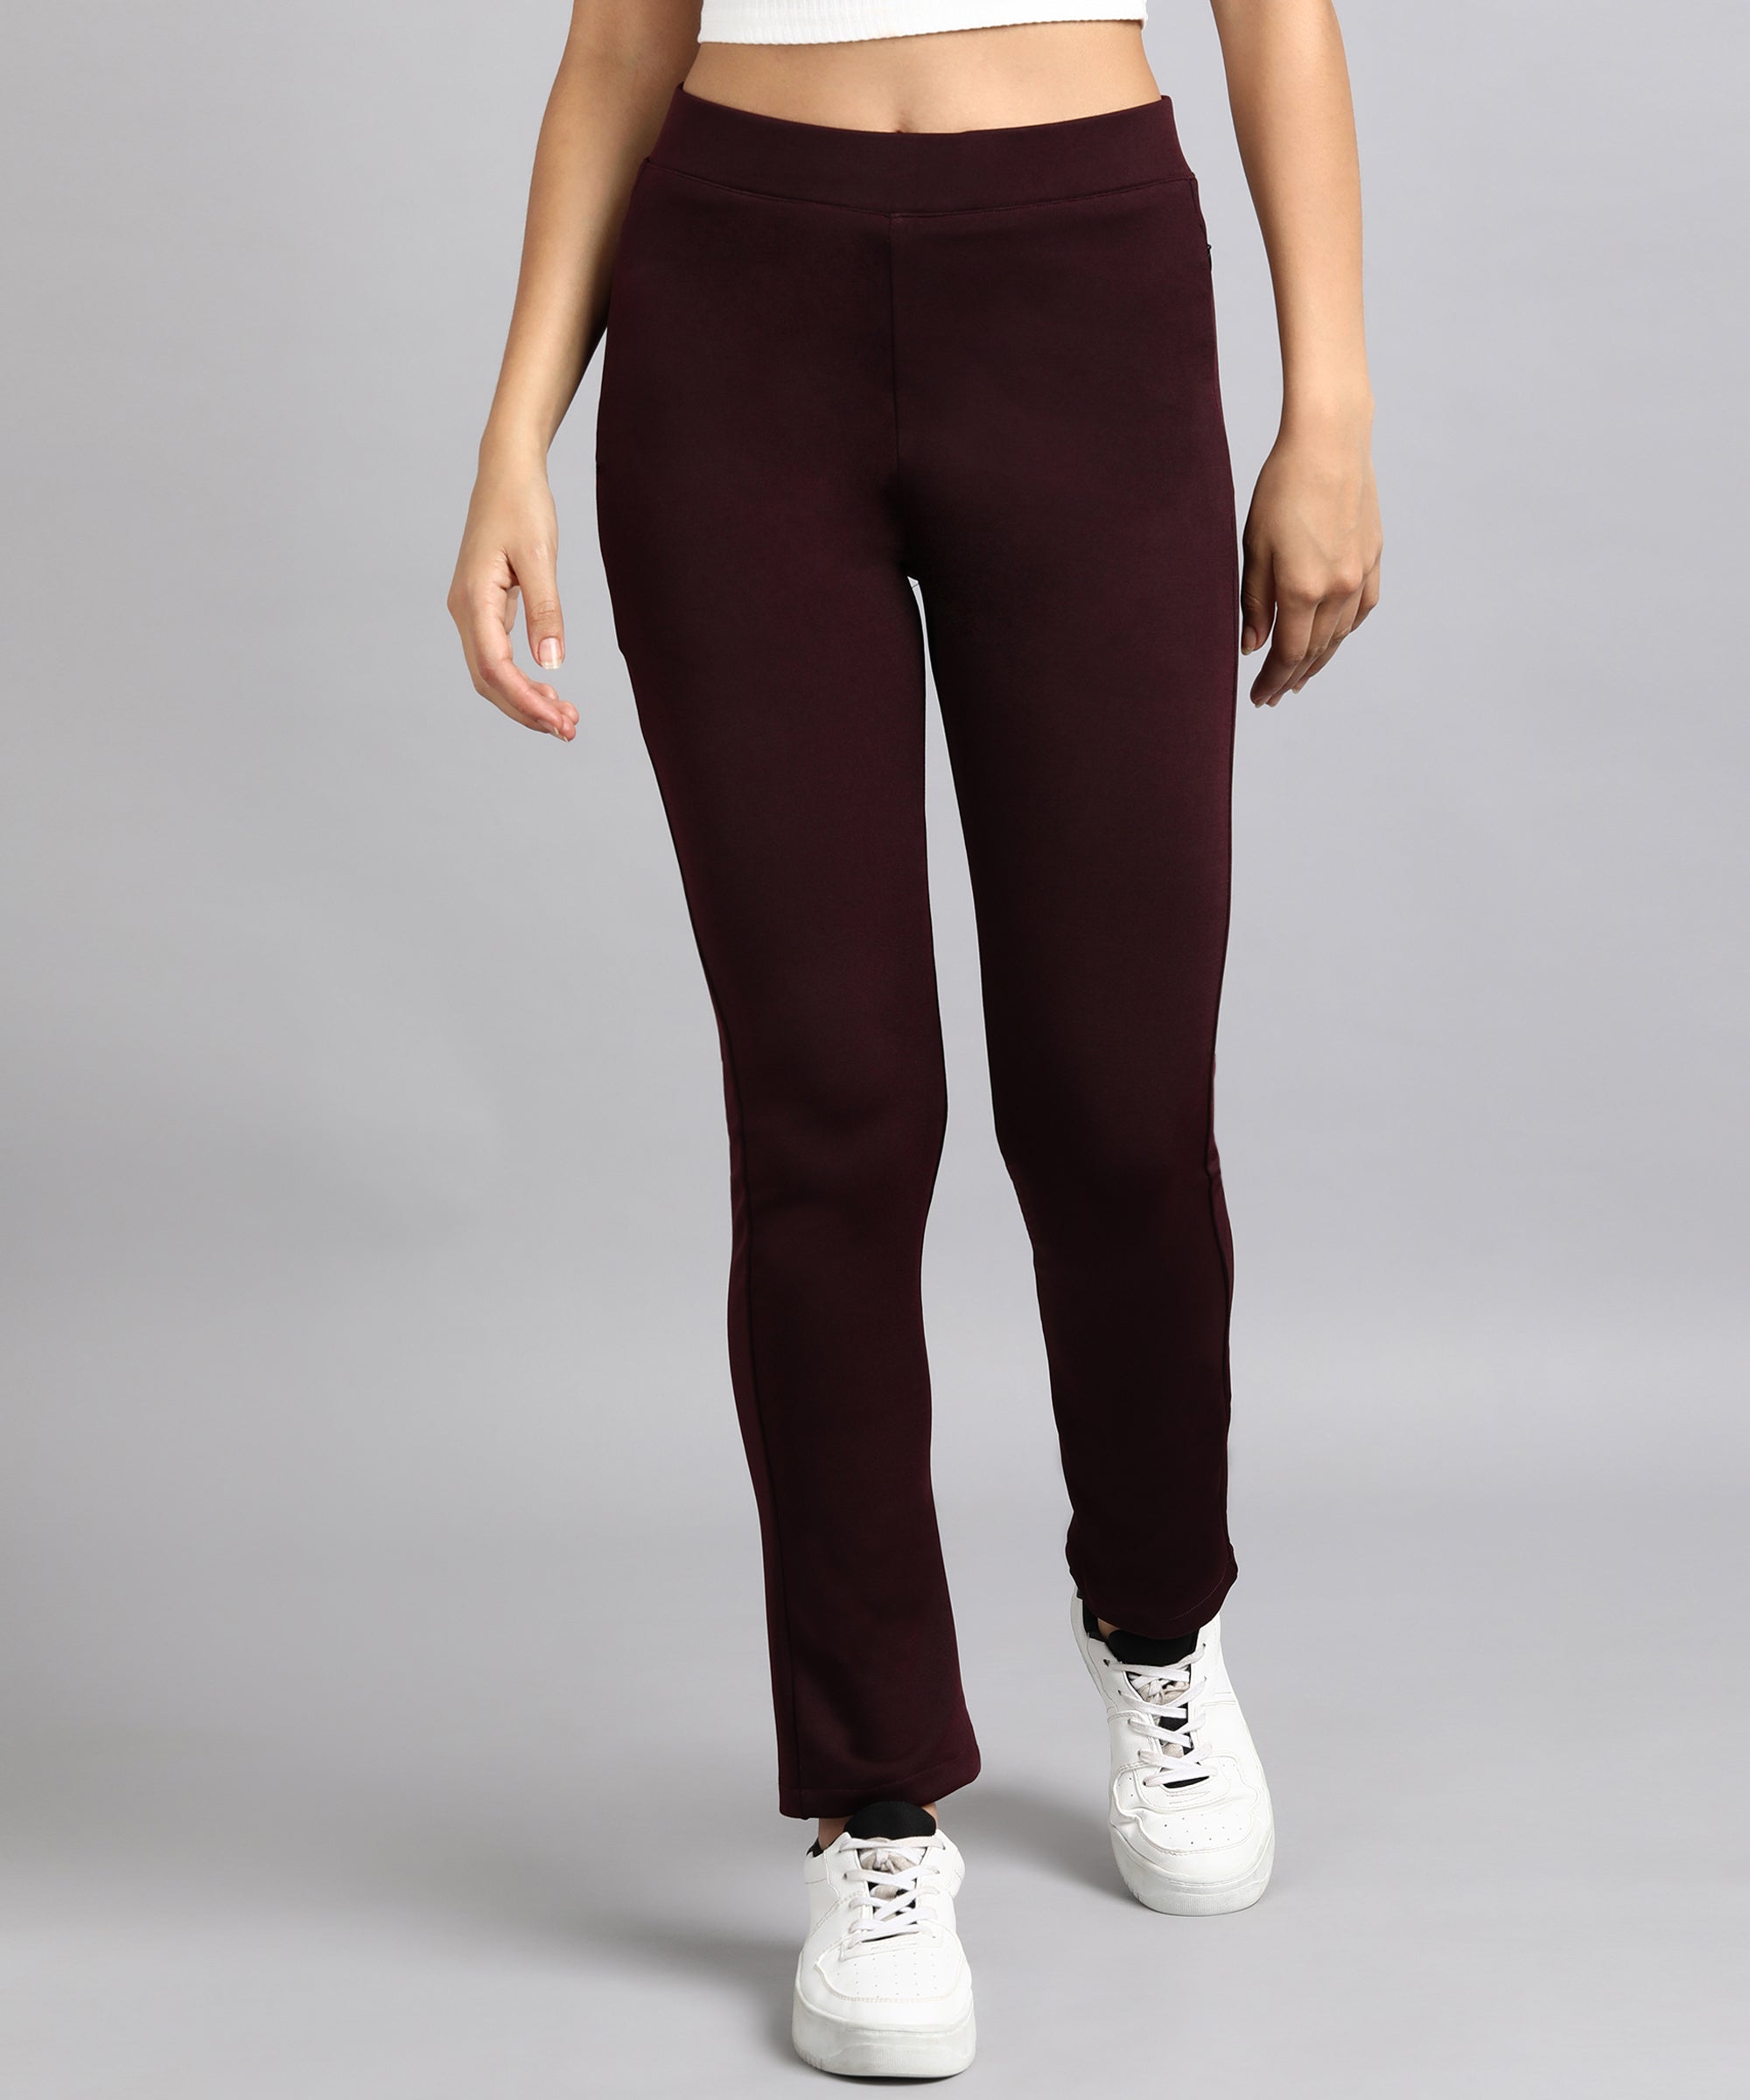 Maroon High-Waisted Stretch Cigarette Trousers for Women -642